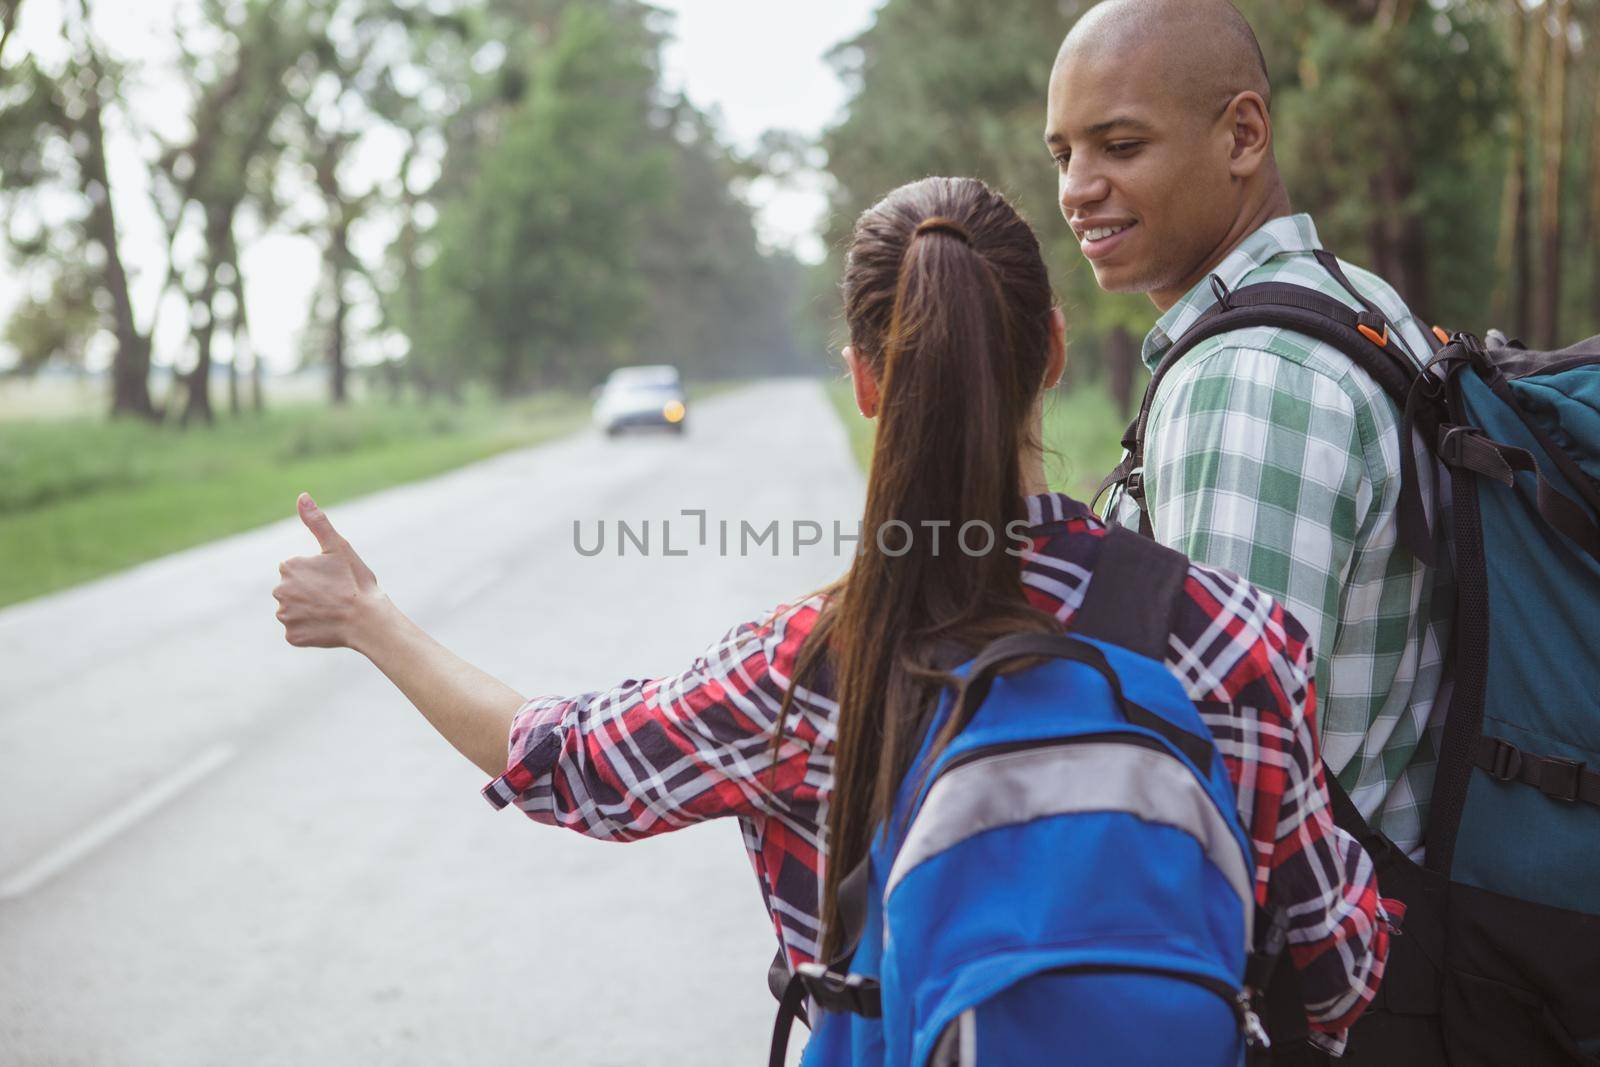 Rear view shot of a couple hitchiking on the countryside road in the forest, copy space. Cheerful handsome African man smiling at his girlfriend while backpacking together